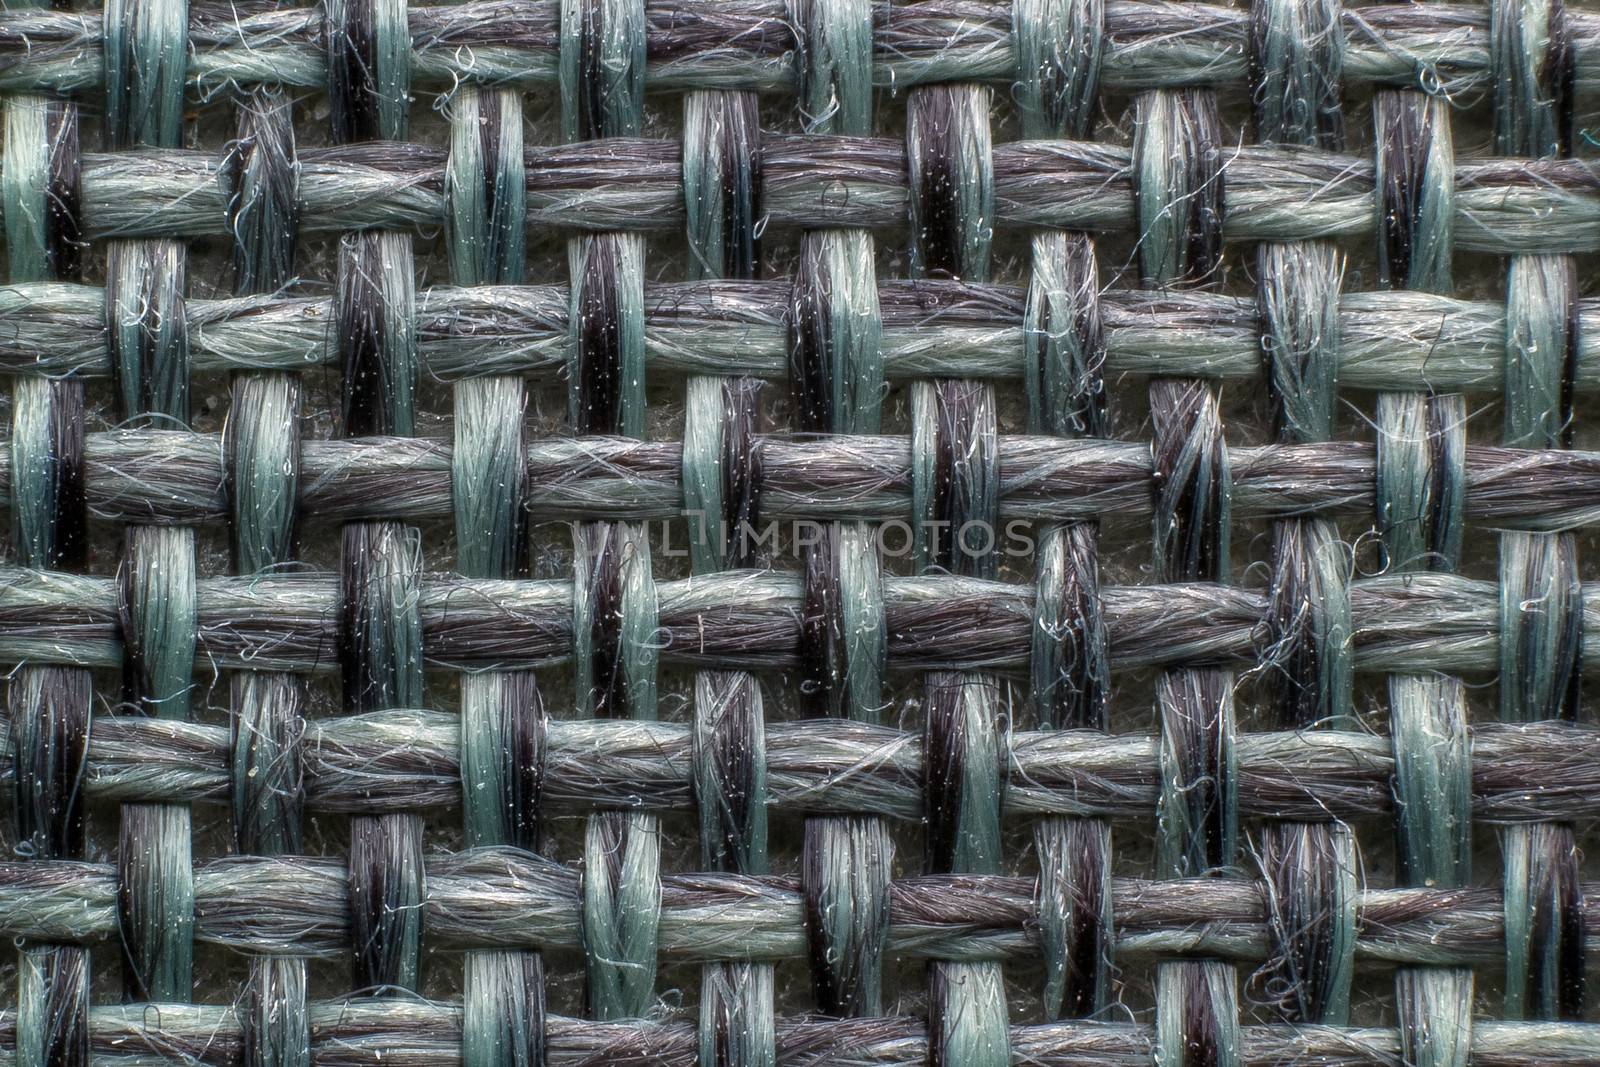 Fabric texture by dynamicfoto